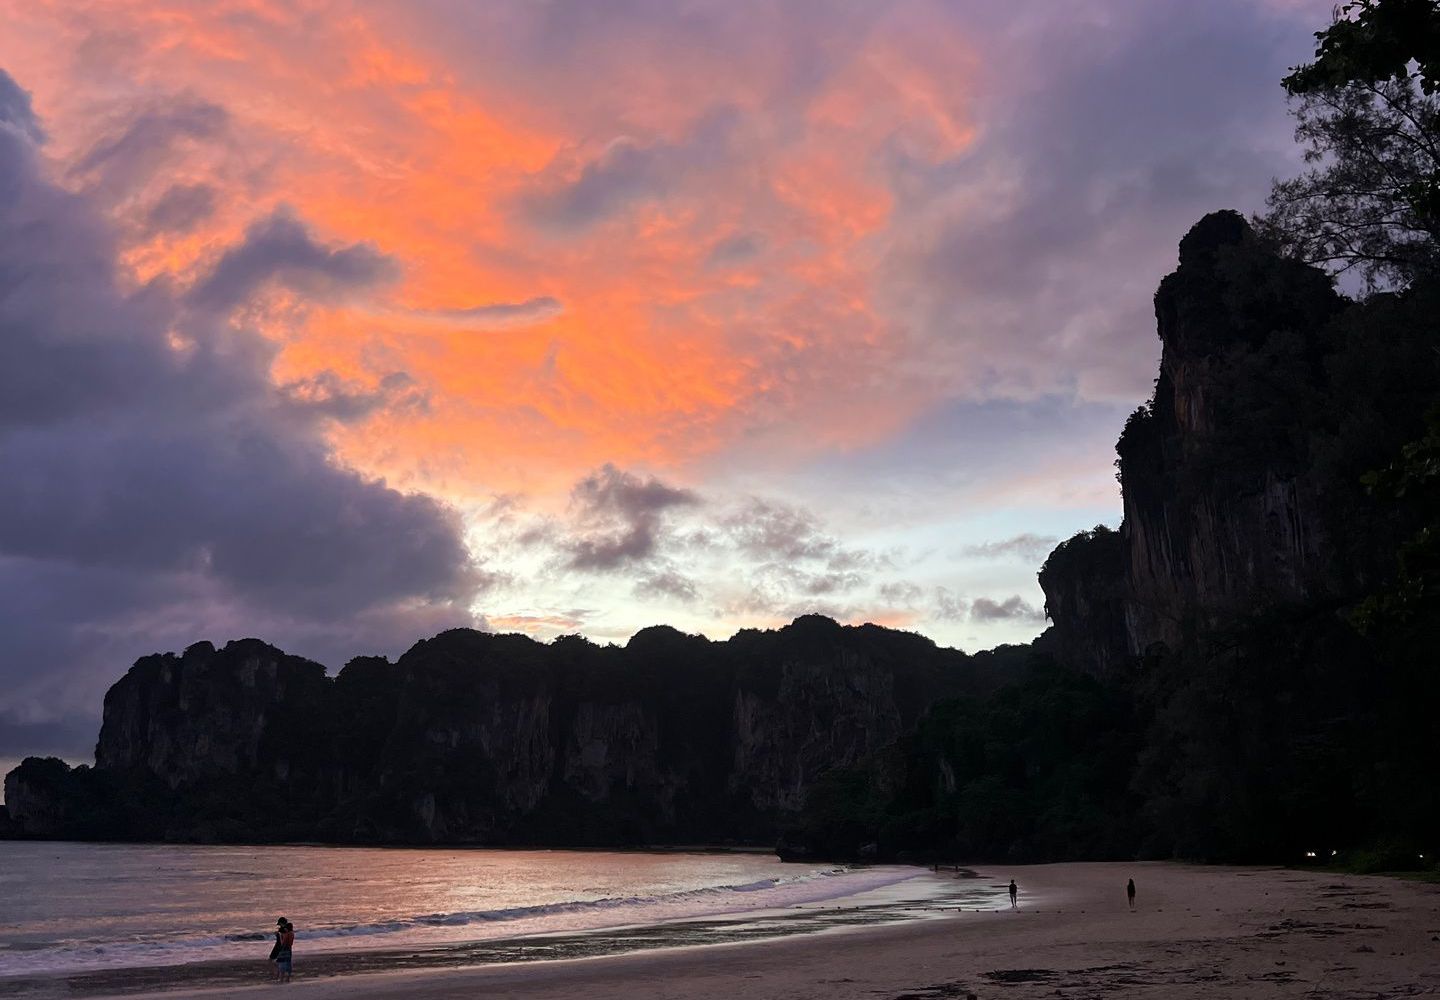 Sunset at the beach in Railay Beach Resort, Thailand. Arriving at Railay Beach and leaving my flip flops